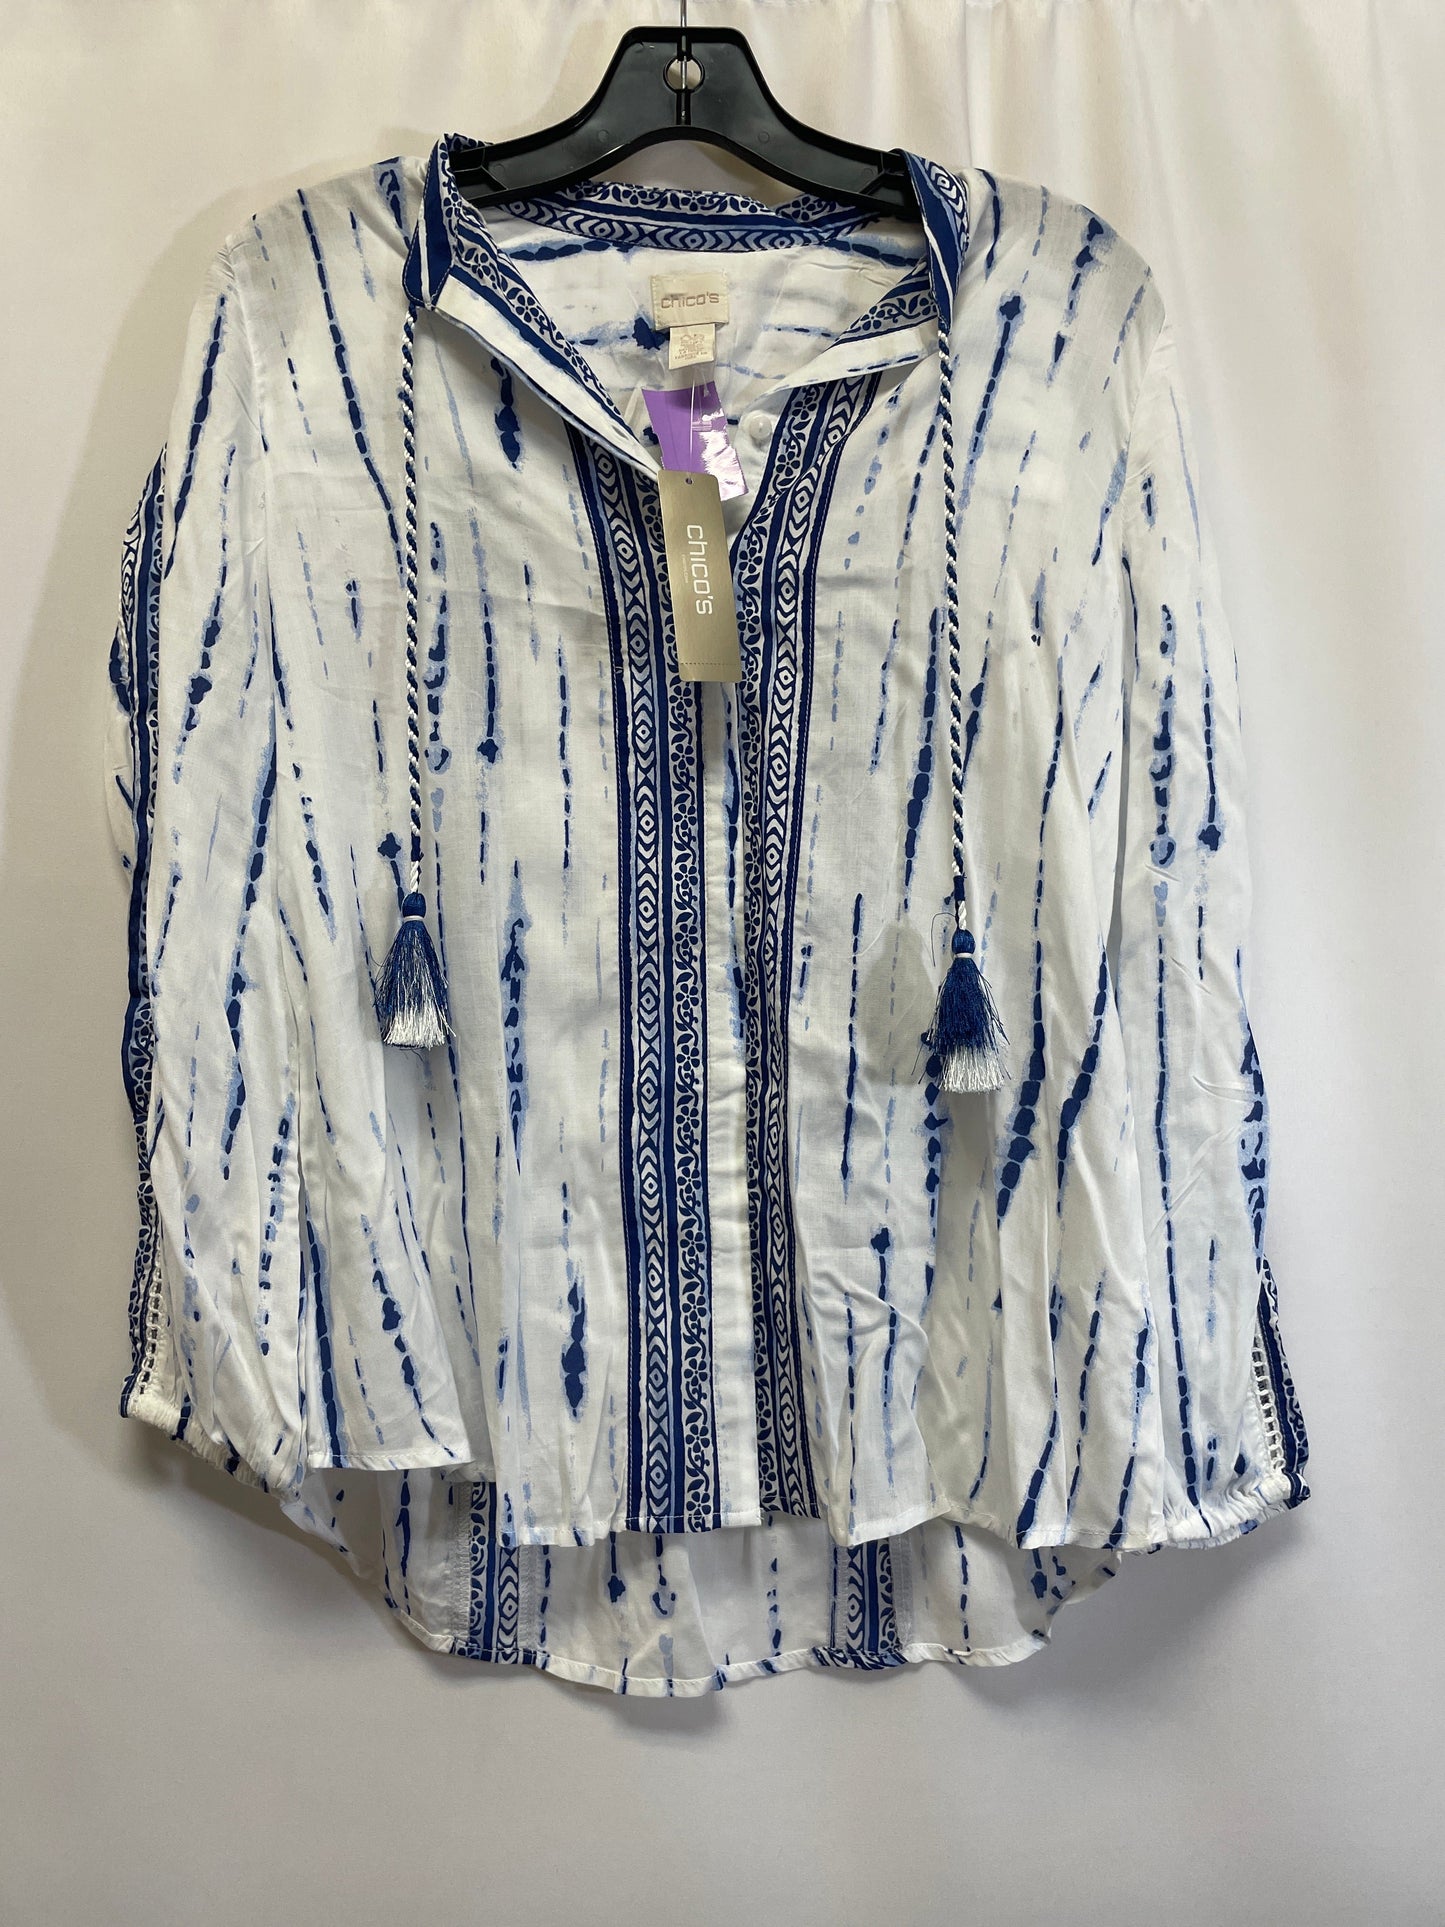 Blue & White Top Long Sleeve Chicos, Size S